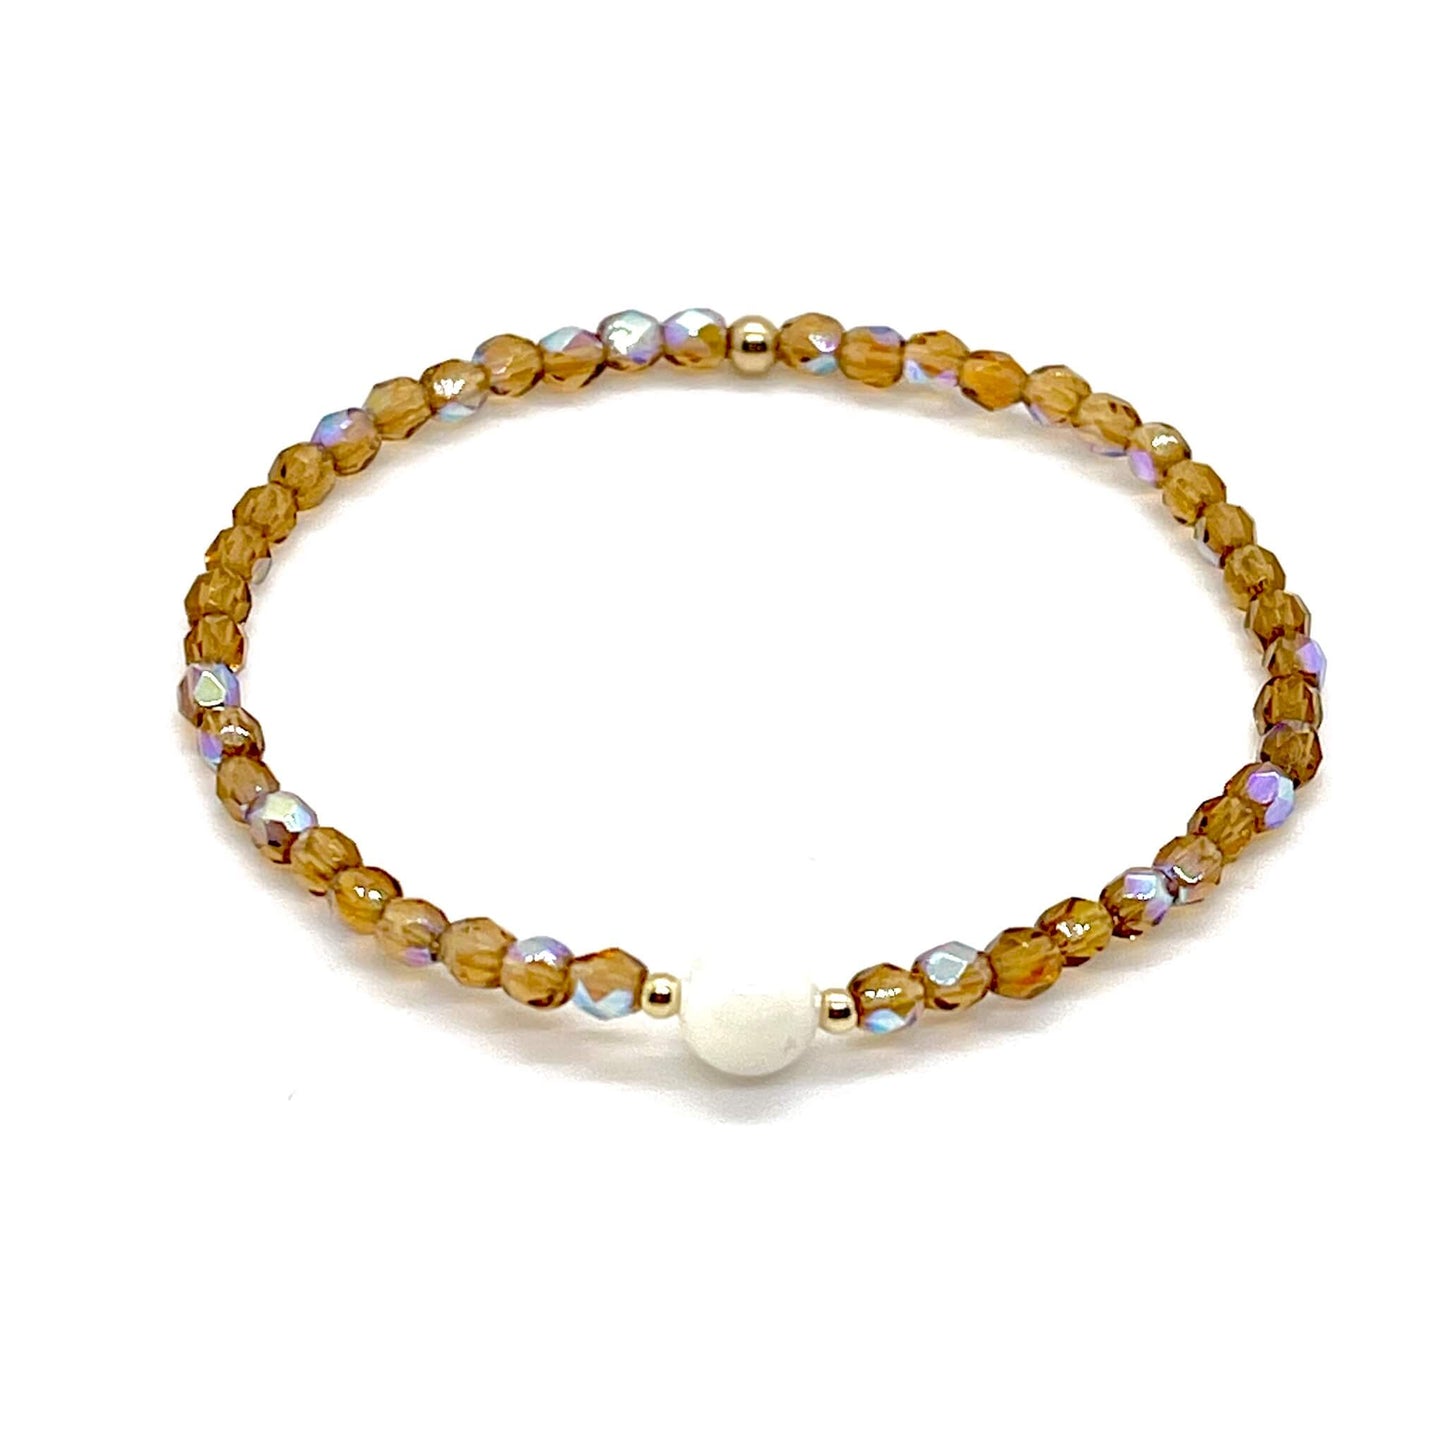 Brown crystal bracelet with a mother-of-pearl center bead and small gold accent beads.